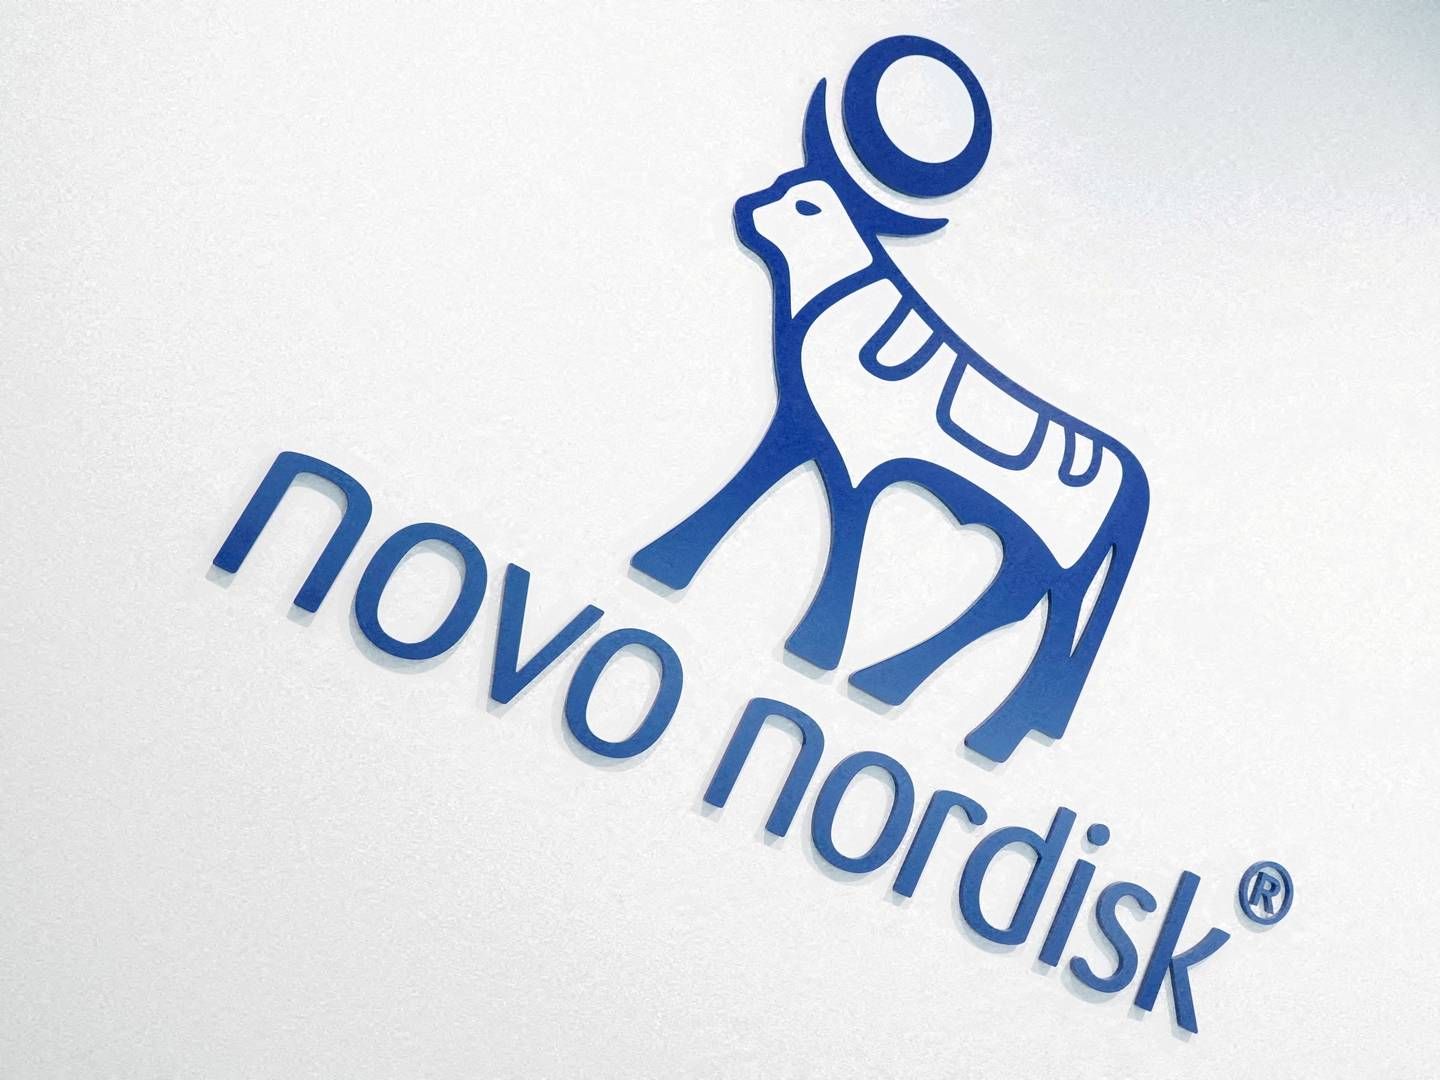 Novo Nordisk has paid US healthcare professionals fees for presentations and consulting services to promote the weight loss drug. | Photo: Tom Little